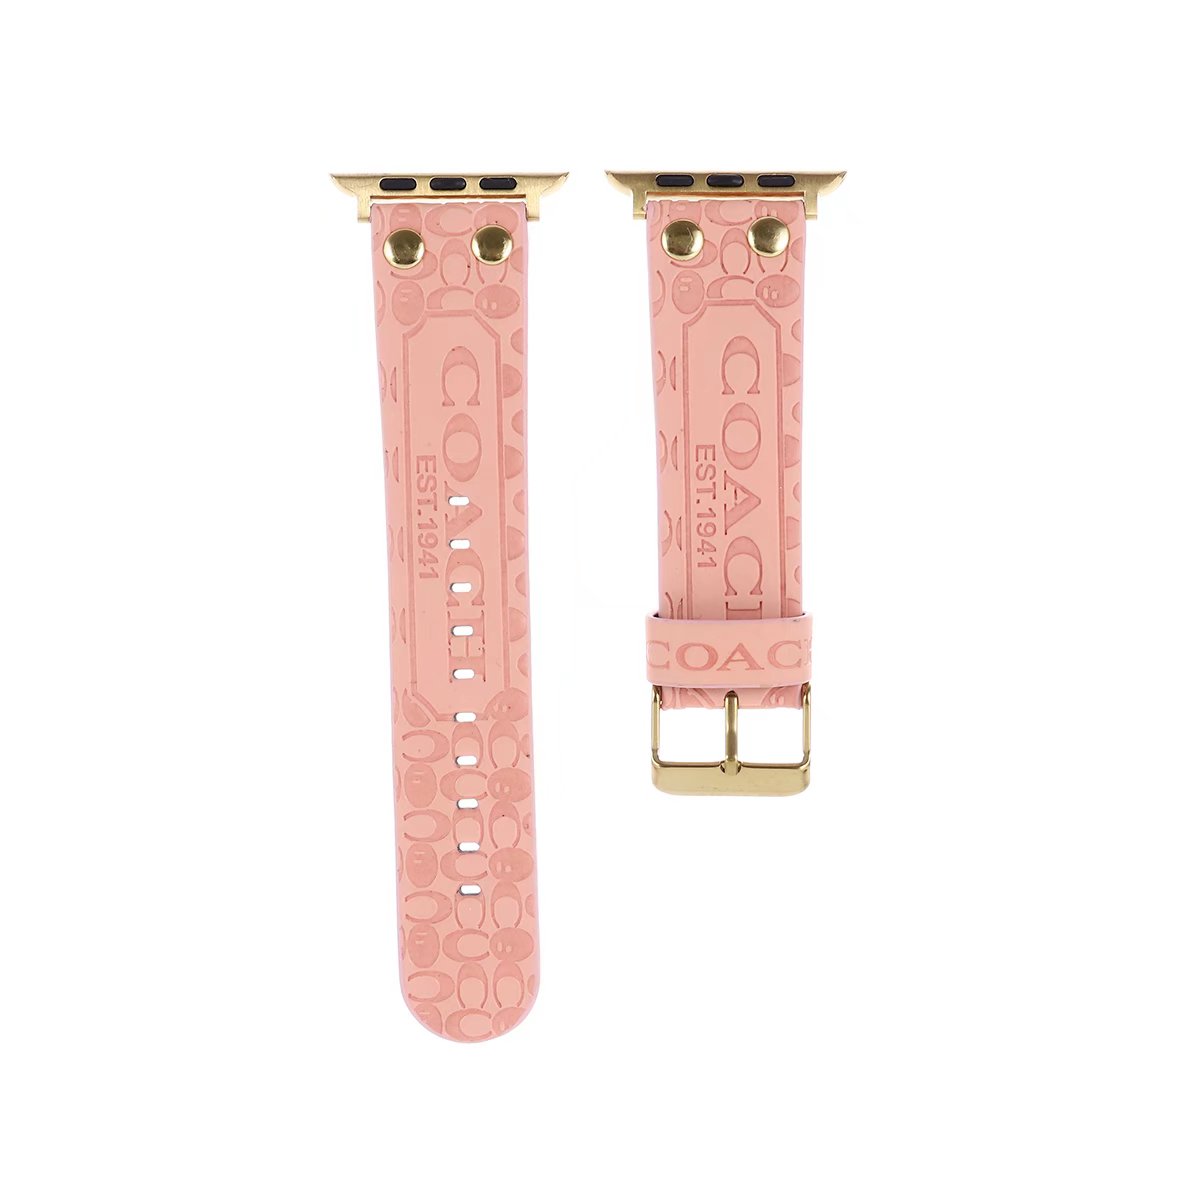 Debossed Coach Watch Band in pink